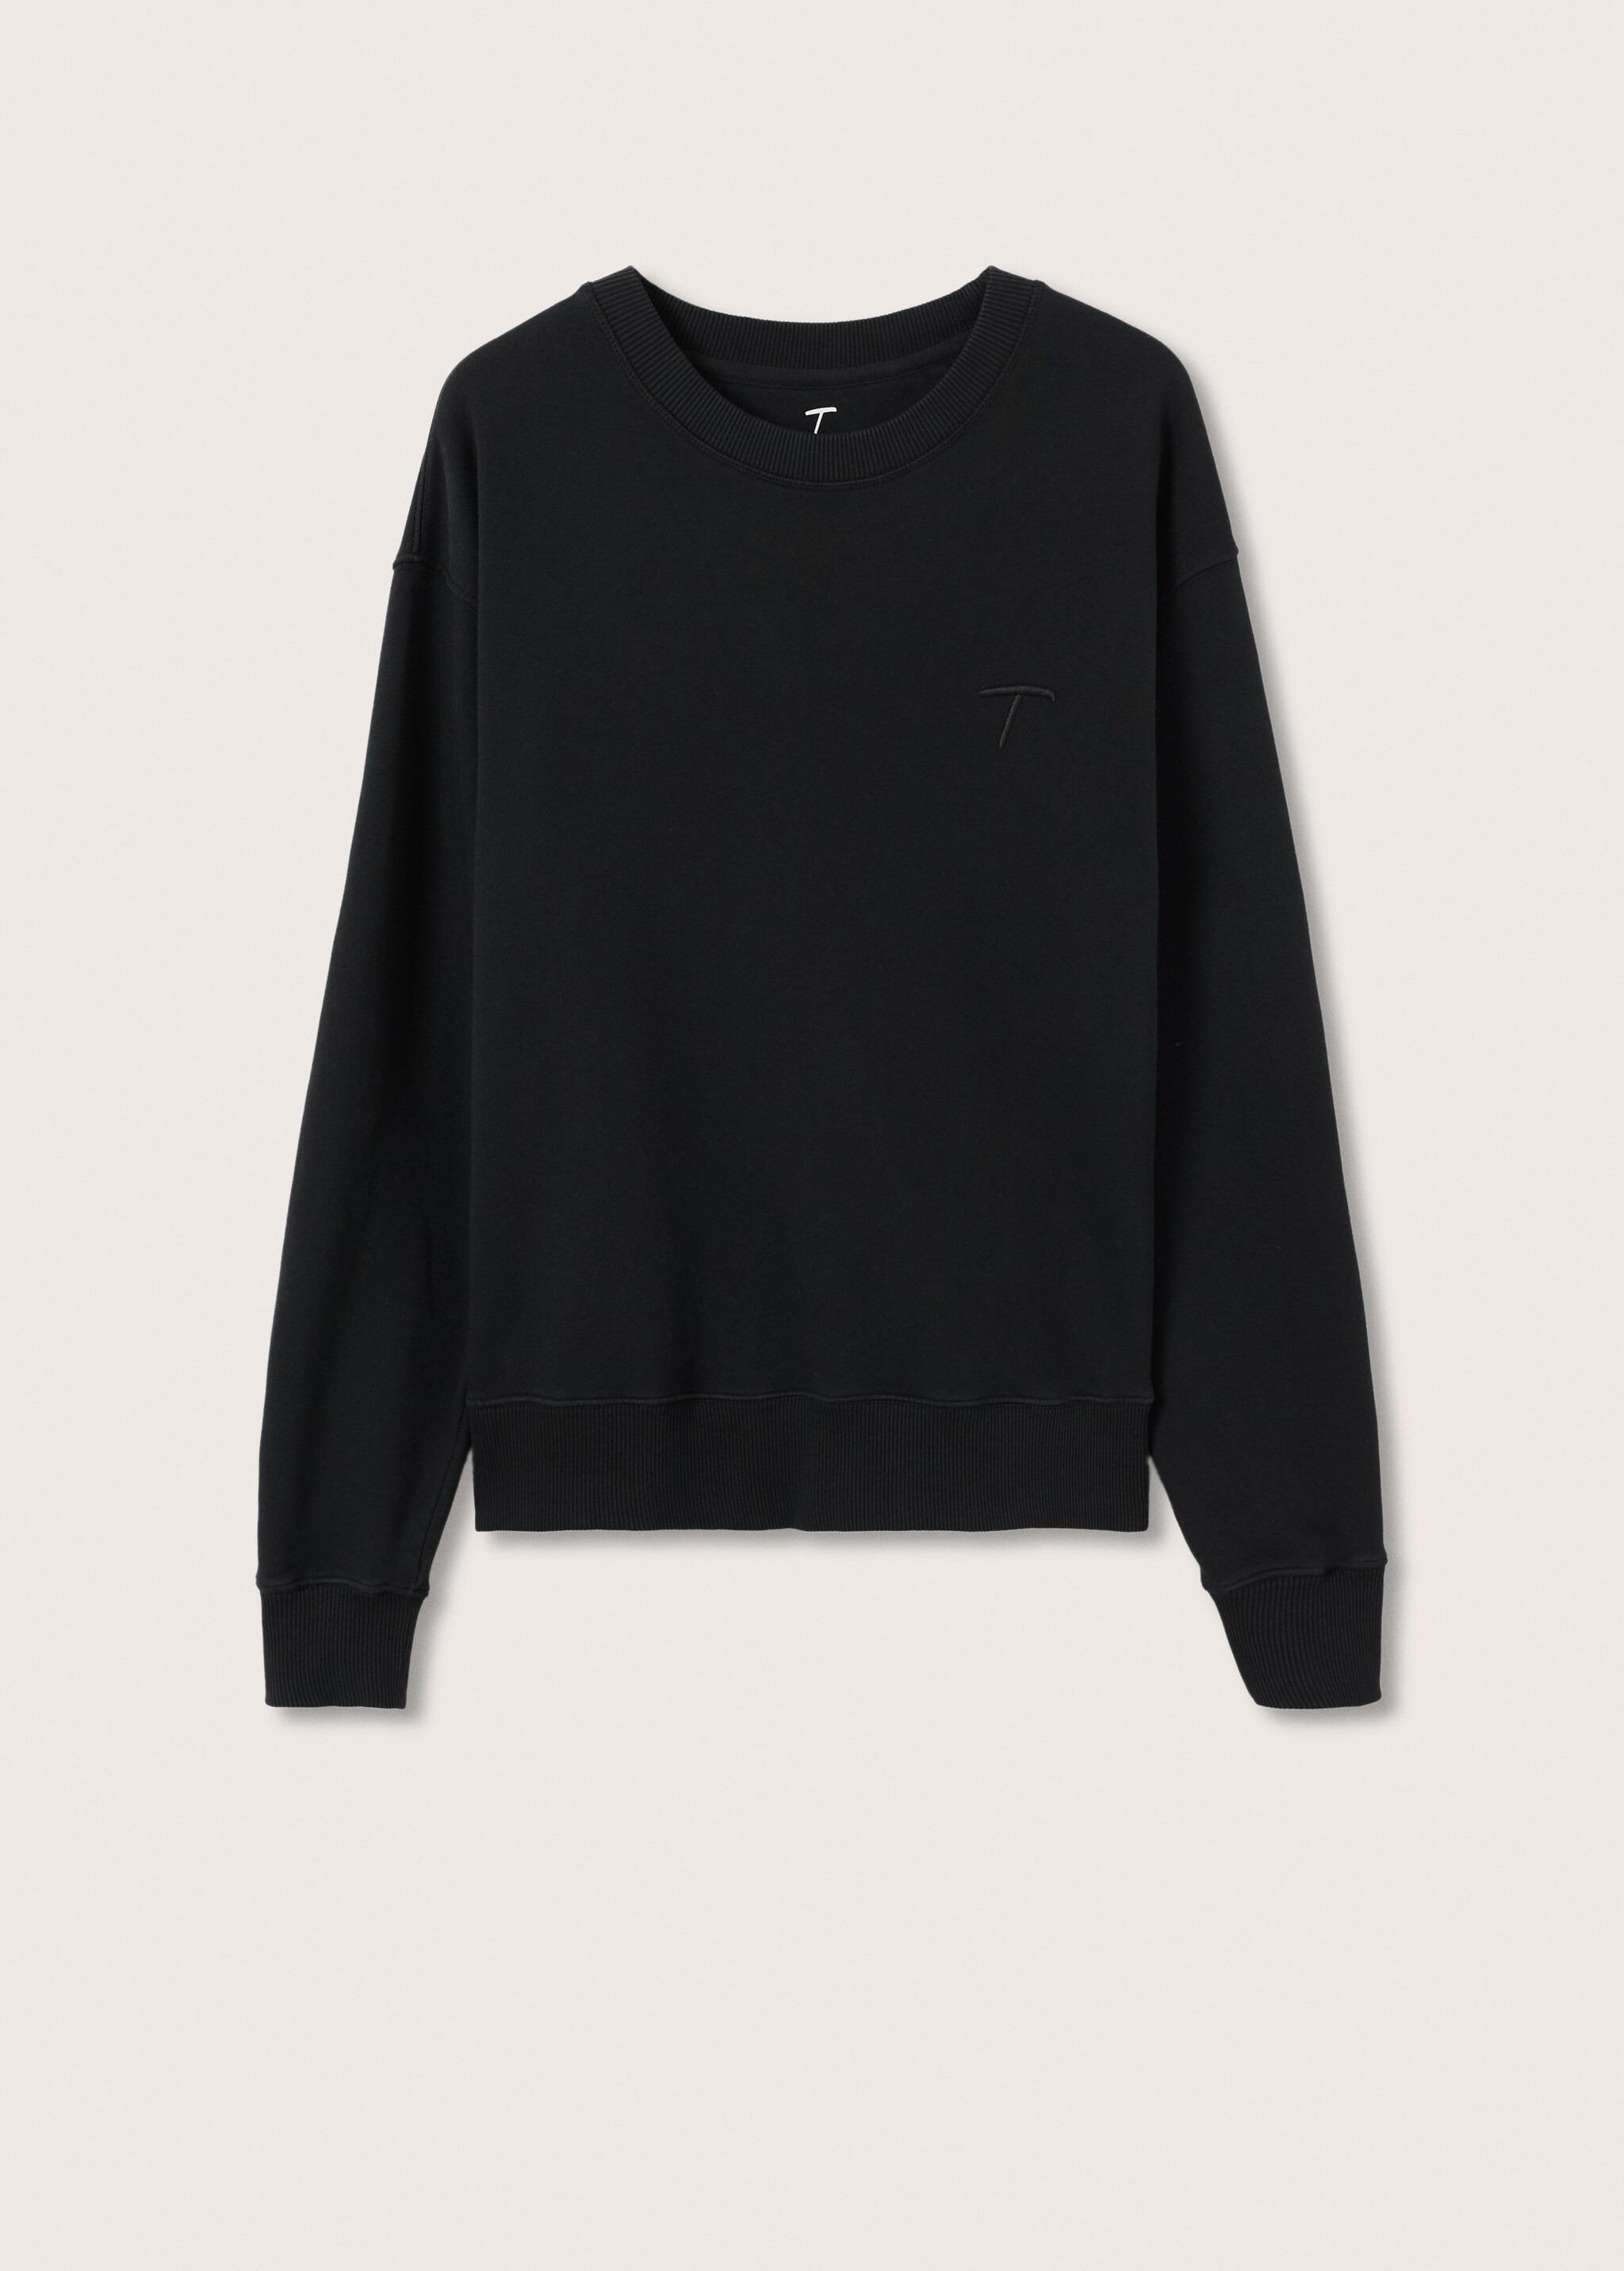 T Collection unisex sweatshirt  - Article without model